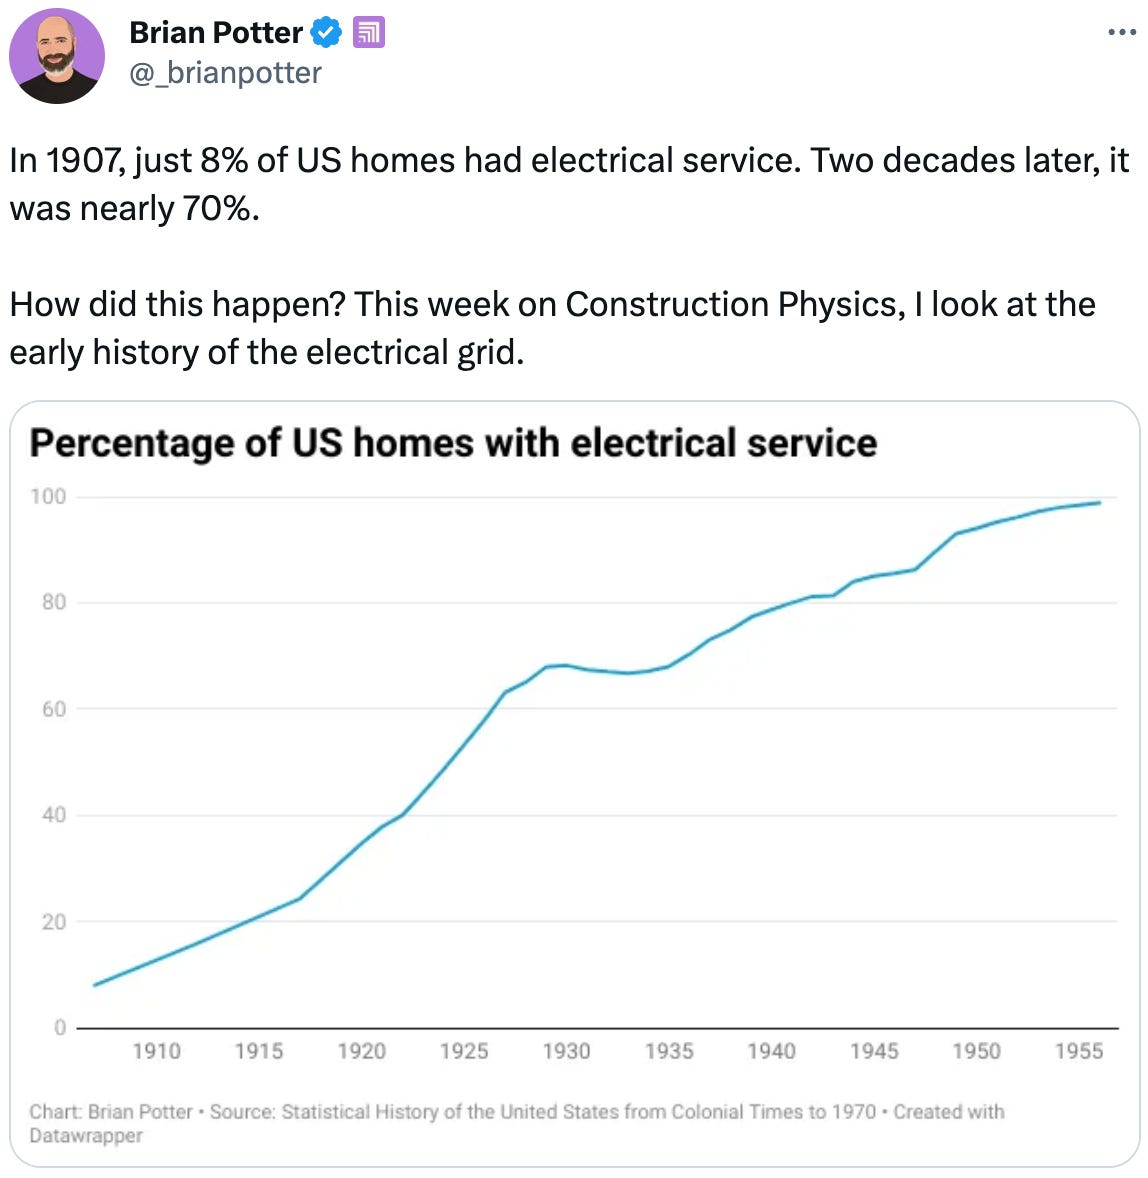  Brian Potter  @_brianpotter In 1907, just 8% of US homes had electrical service. Two decades later, it was nearly 70%.  How did this happen? This week on Construction Physics, I look at the early history of the electrical grid.